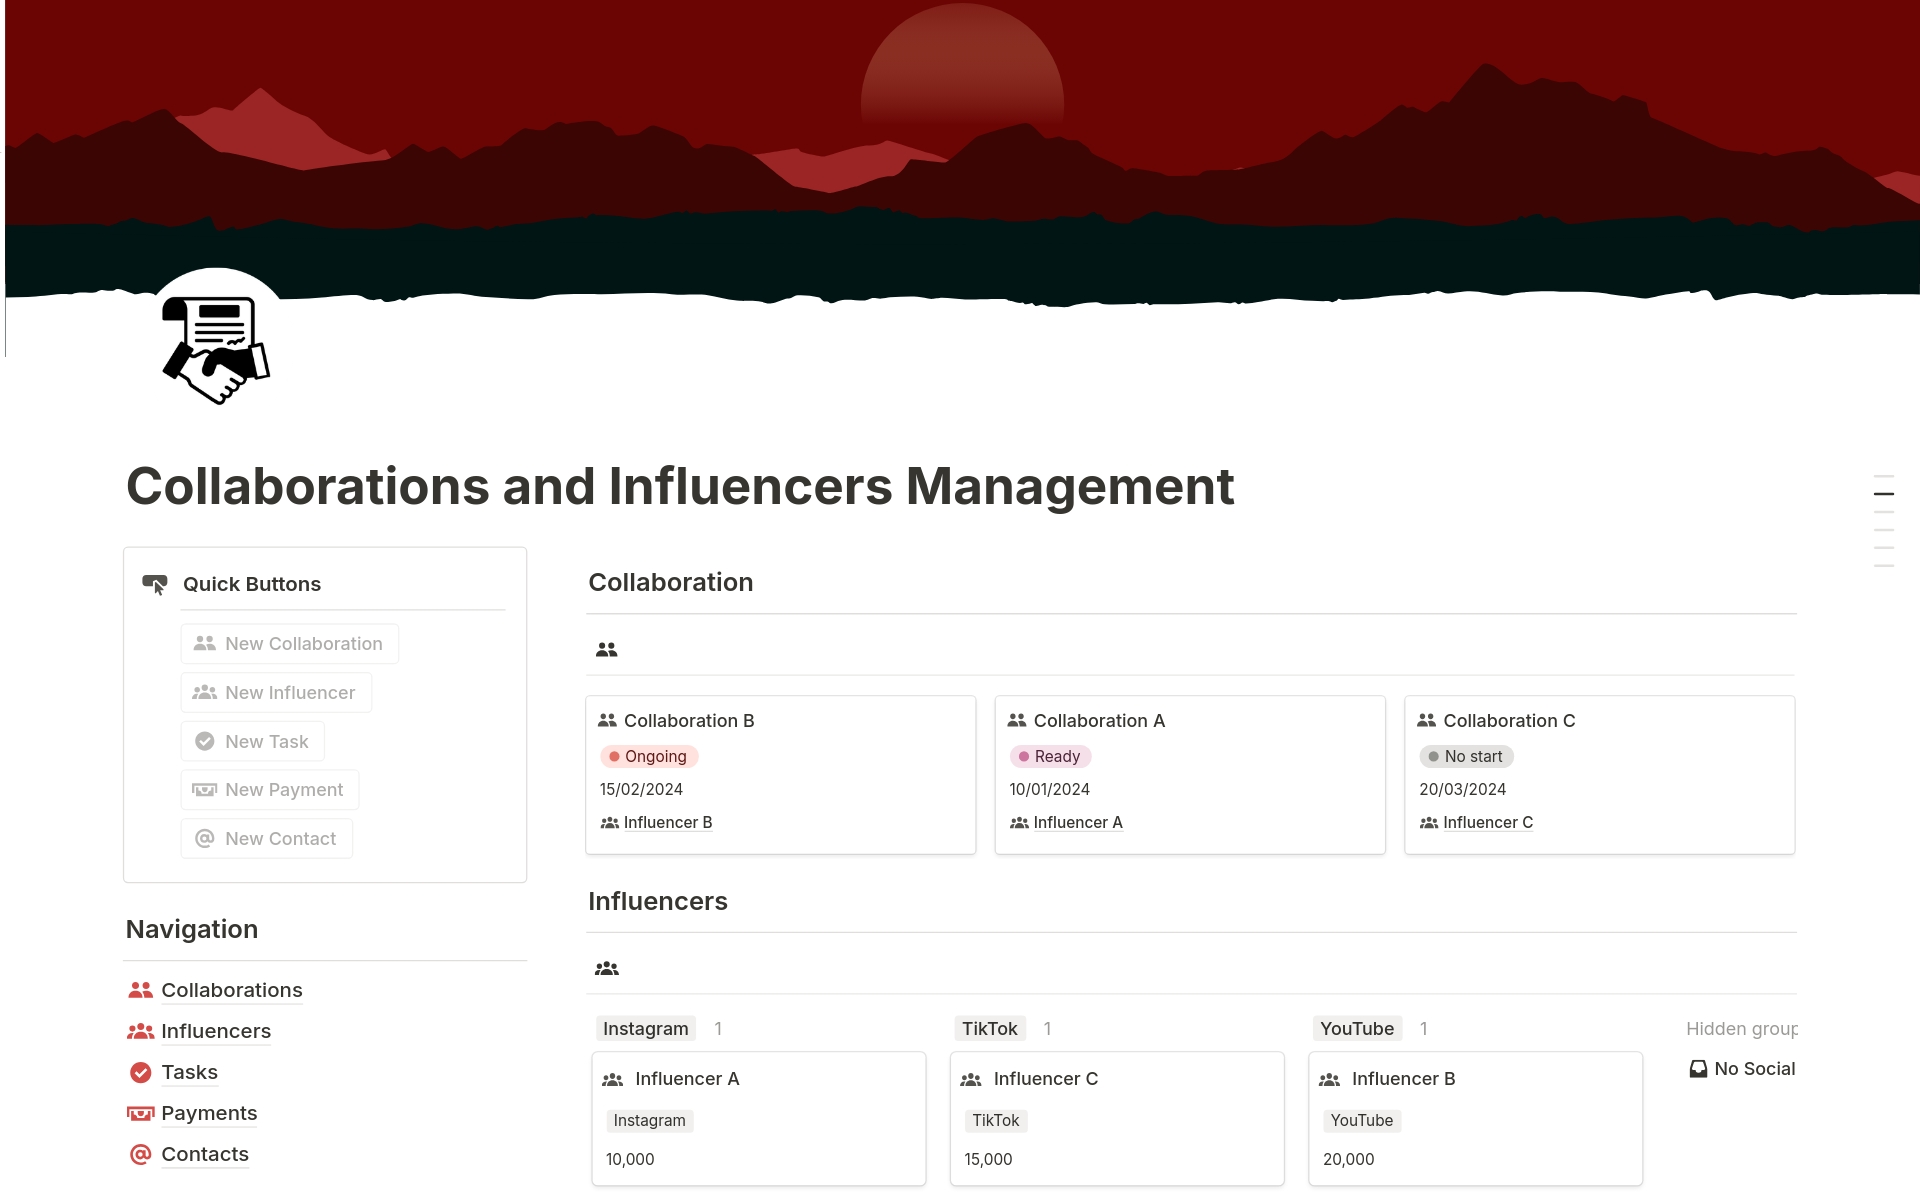 Manage your collaborations with influencers efficiently. Track campaigns, agreements, and results.